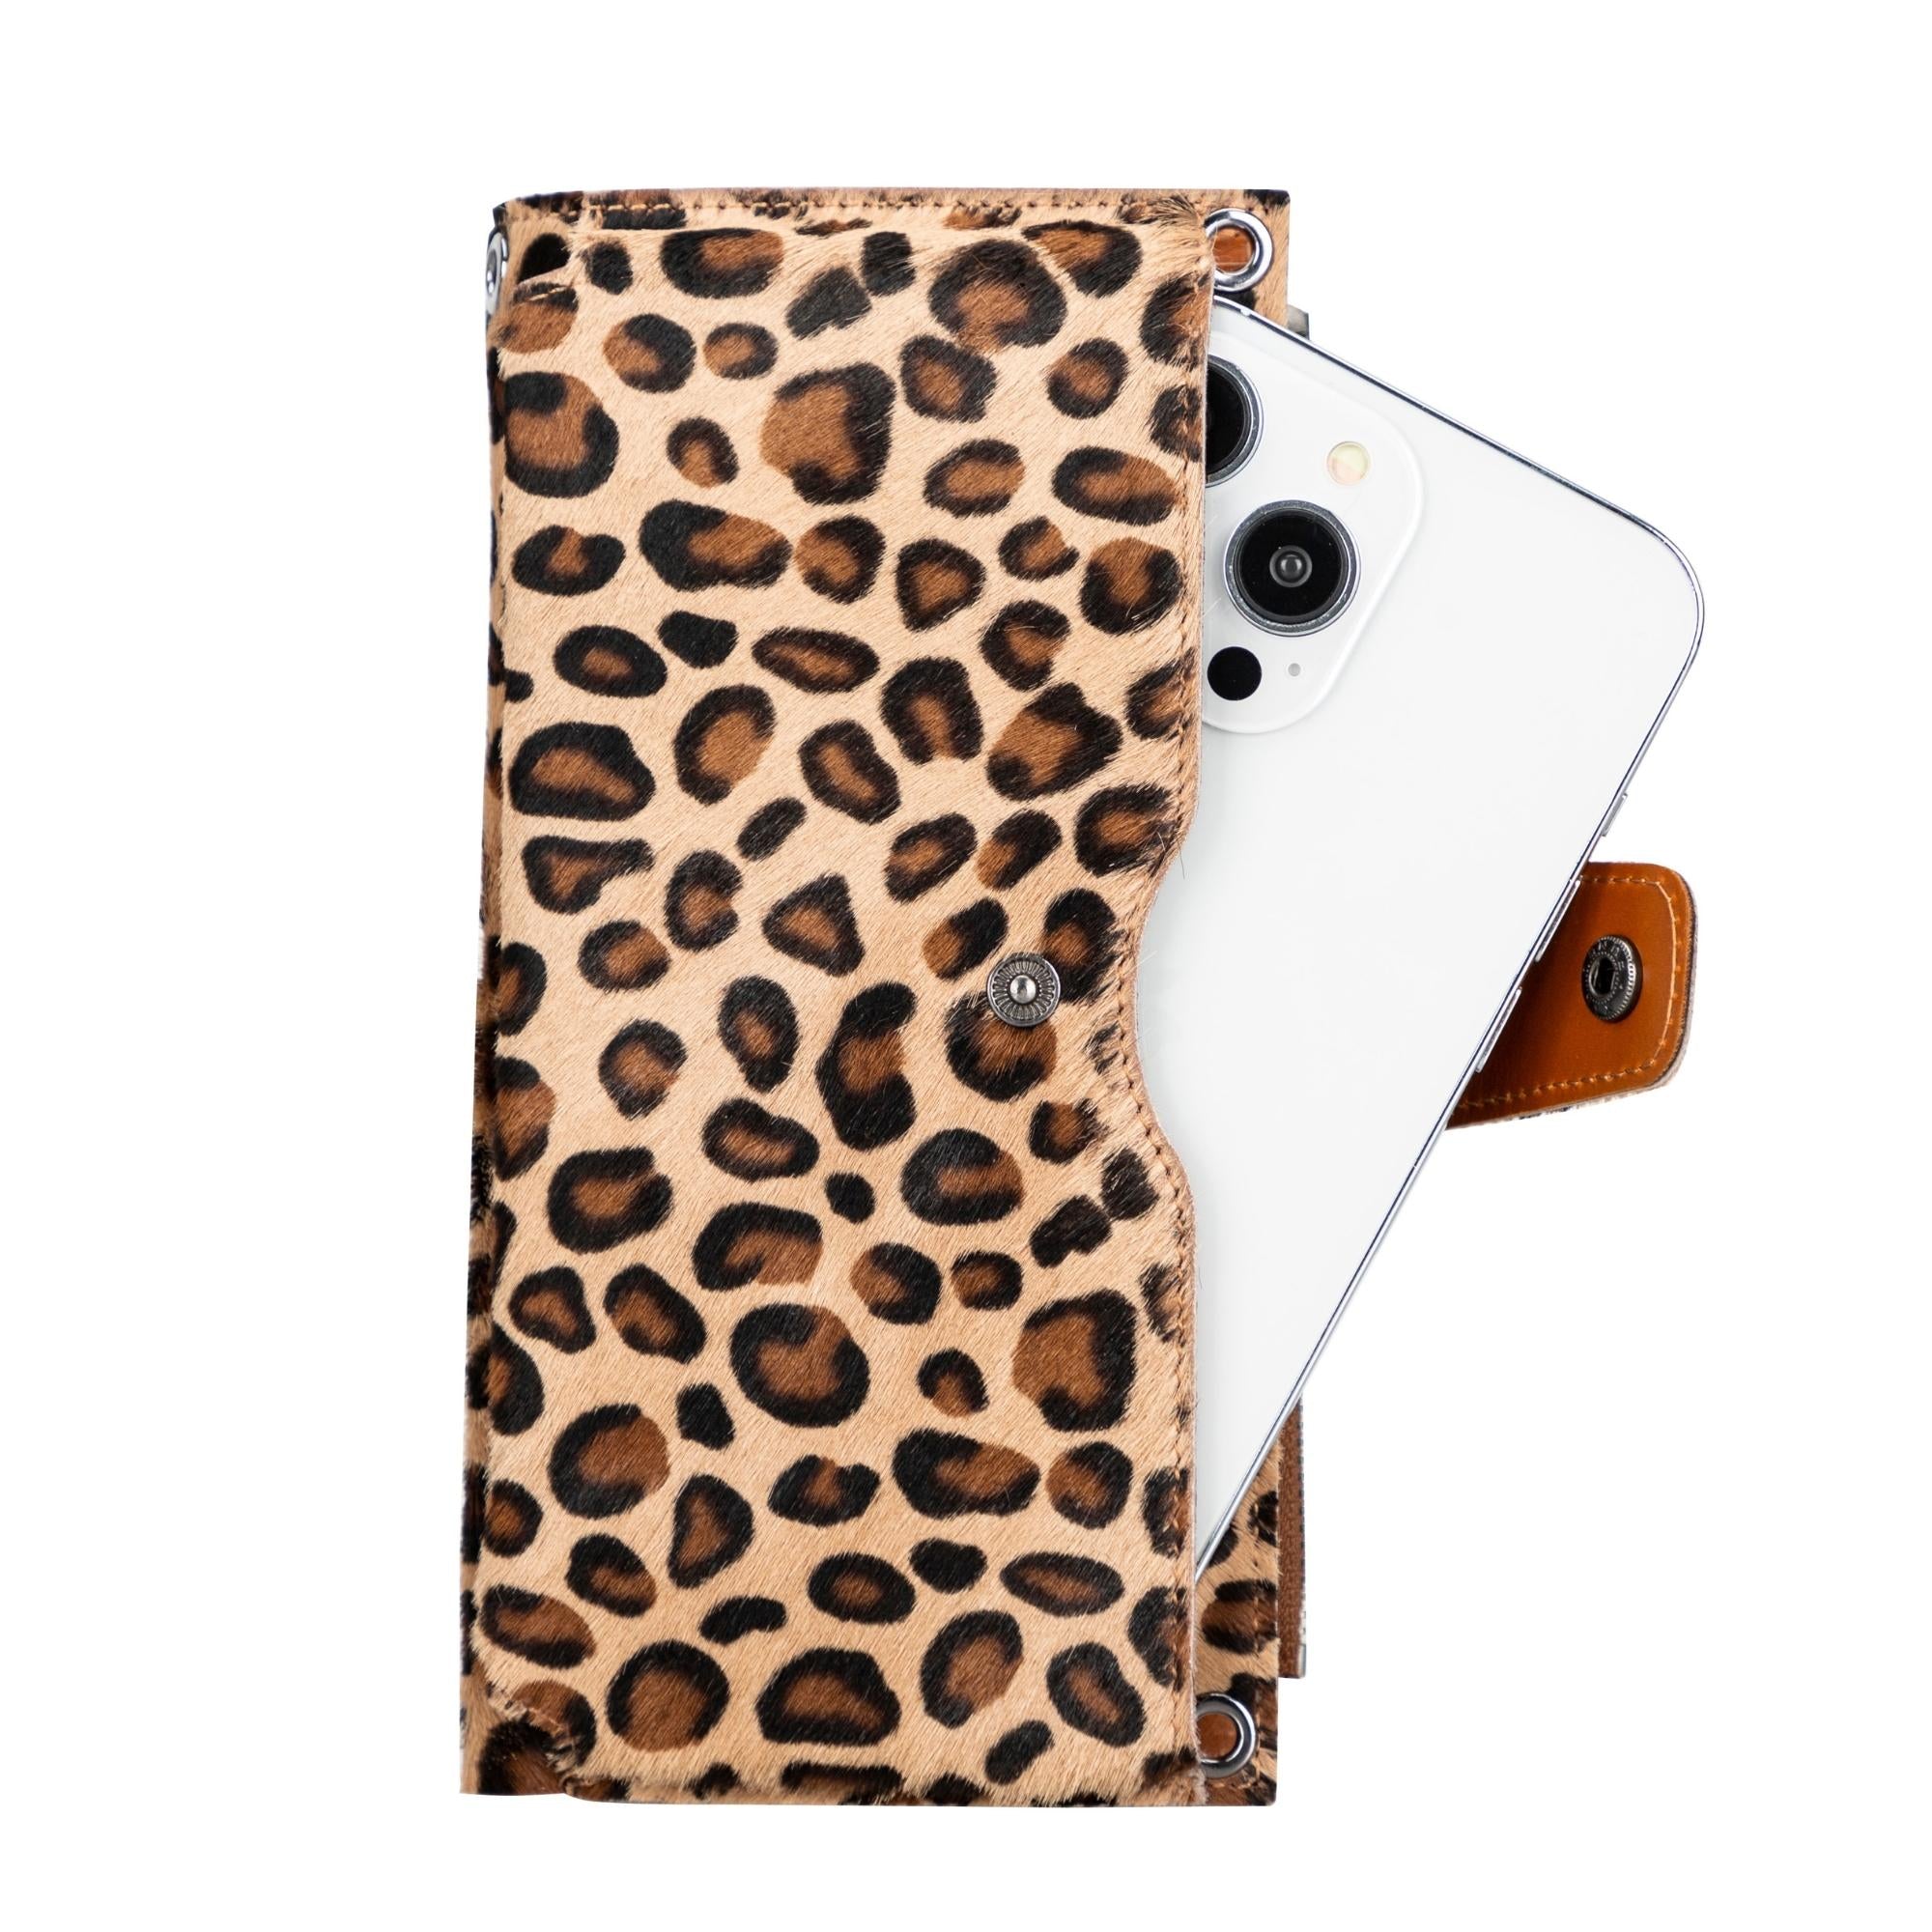 Kaycee Leather Women's Cell Phone Wallet with Strap - Leopard - 6.9" - TORONATA